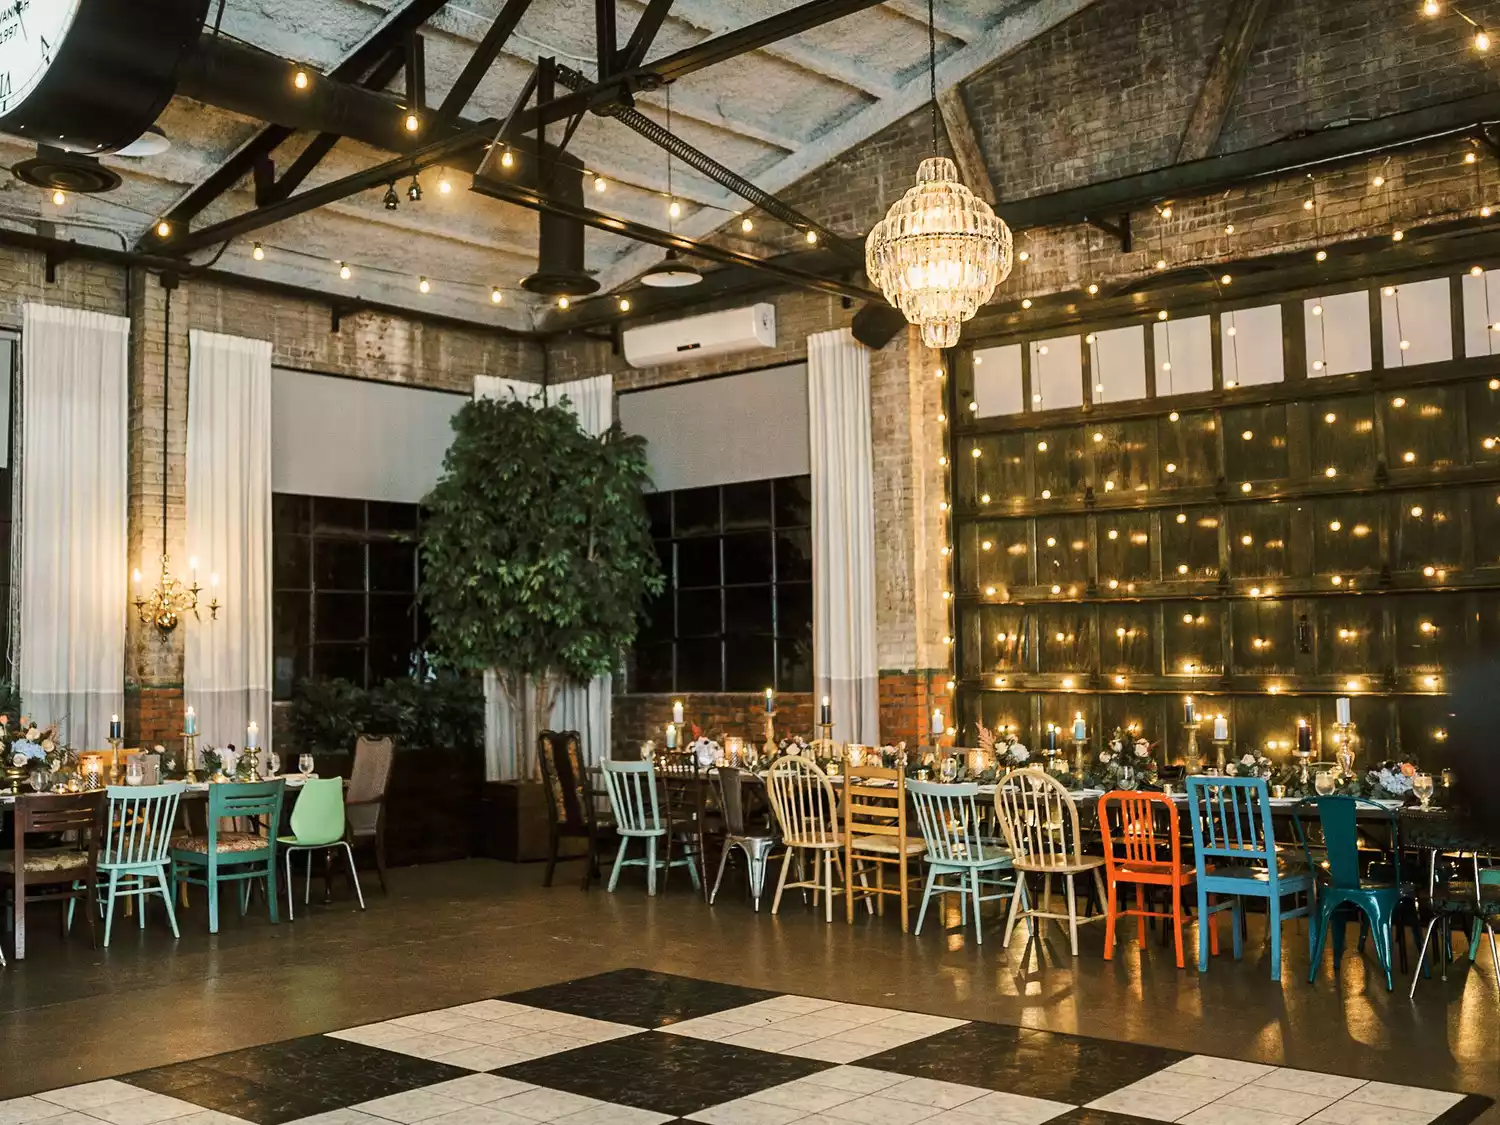 Soho South Cafe wedding reception set with colorful mismatched chairs and a black and white dance floor.